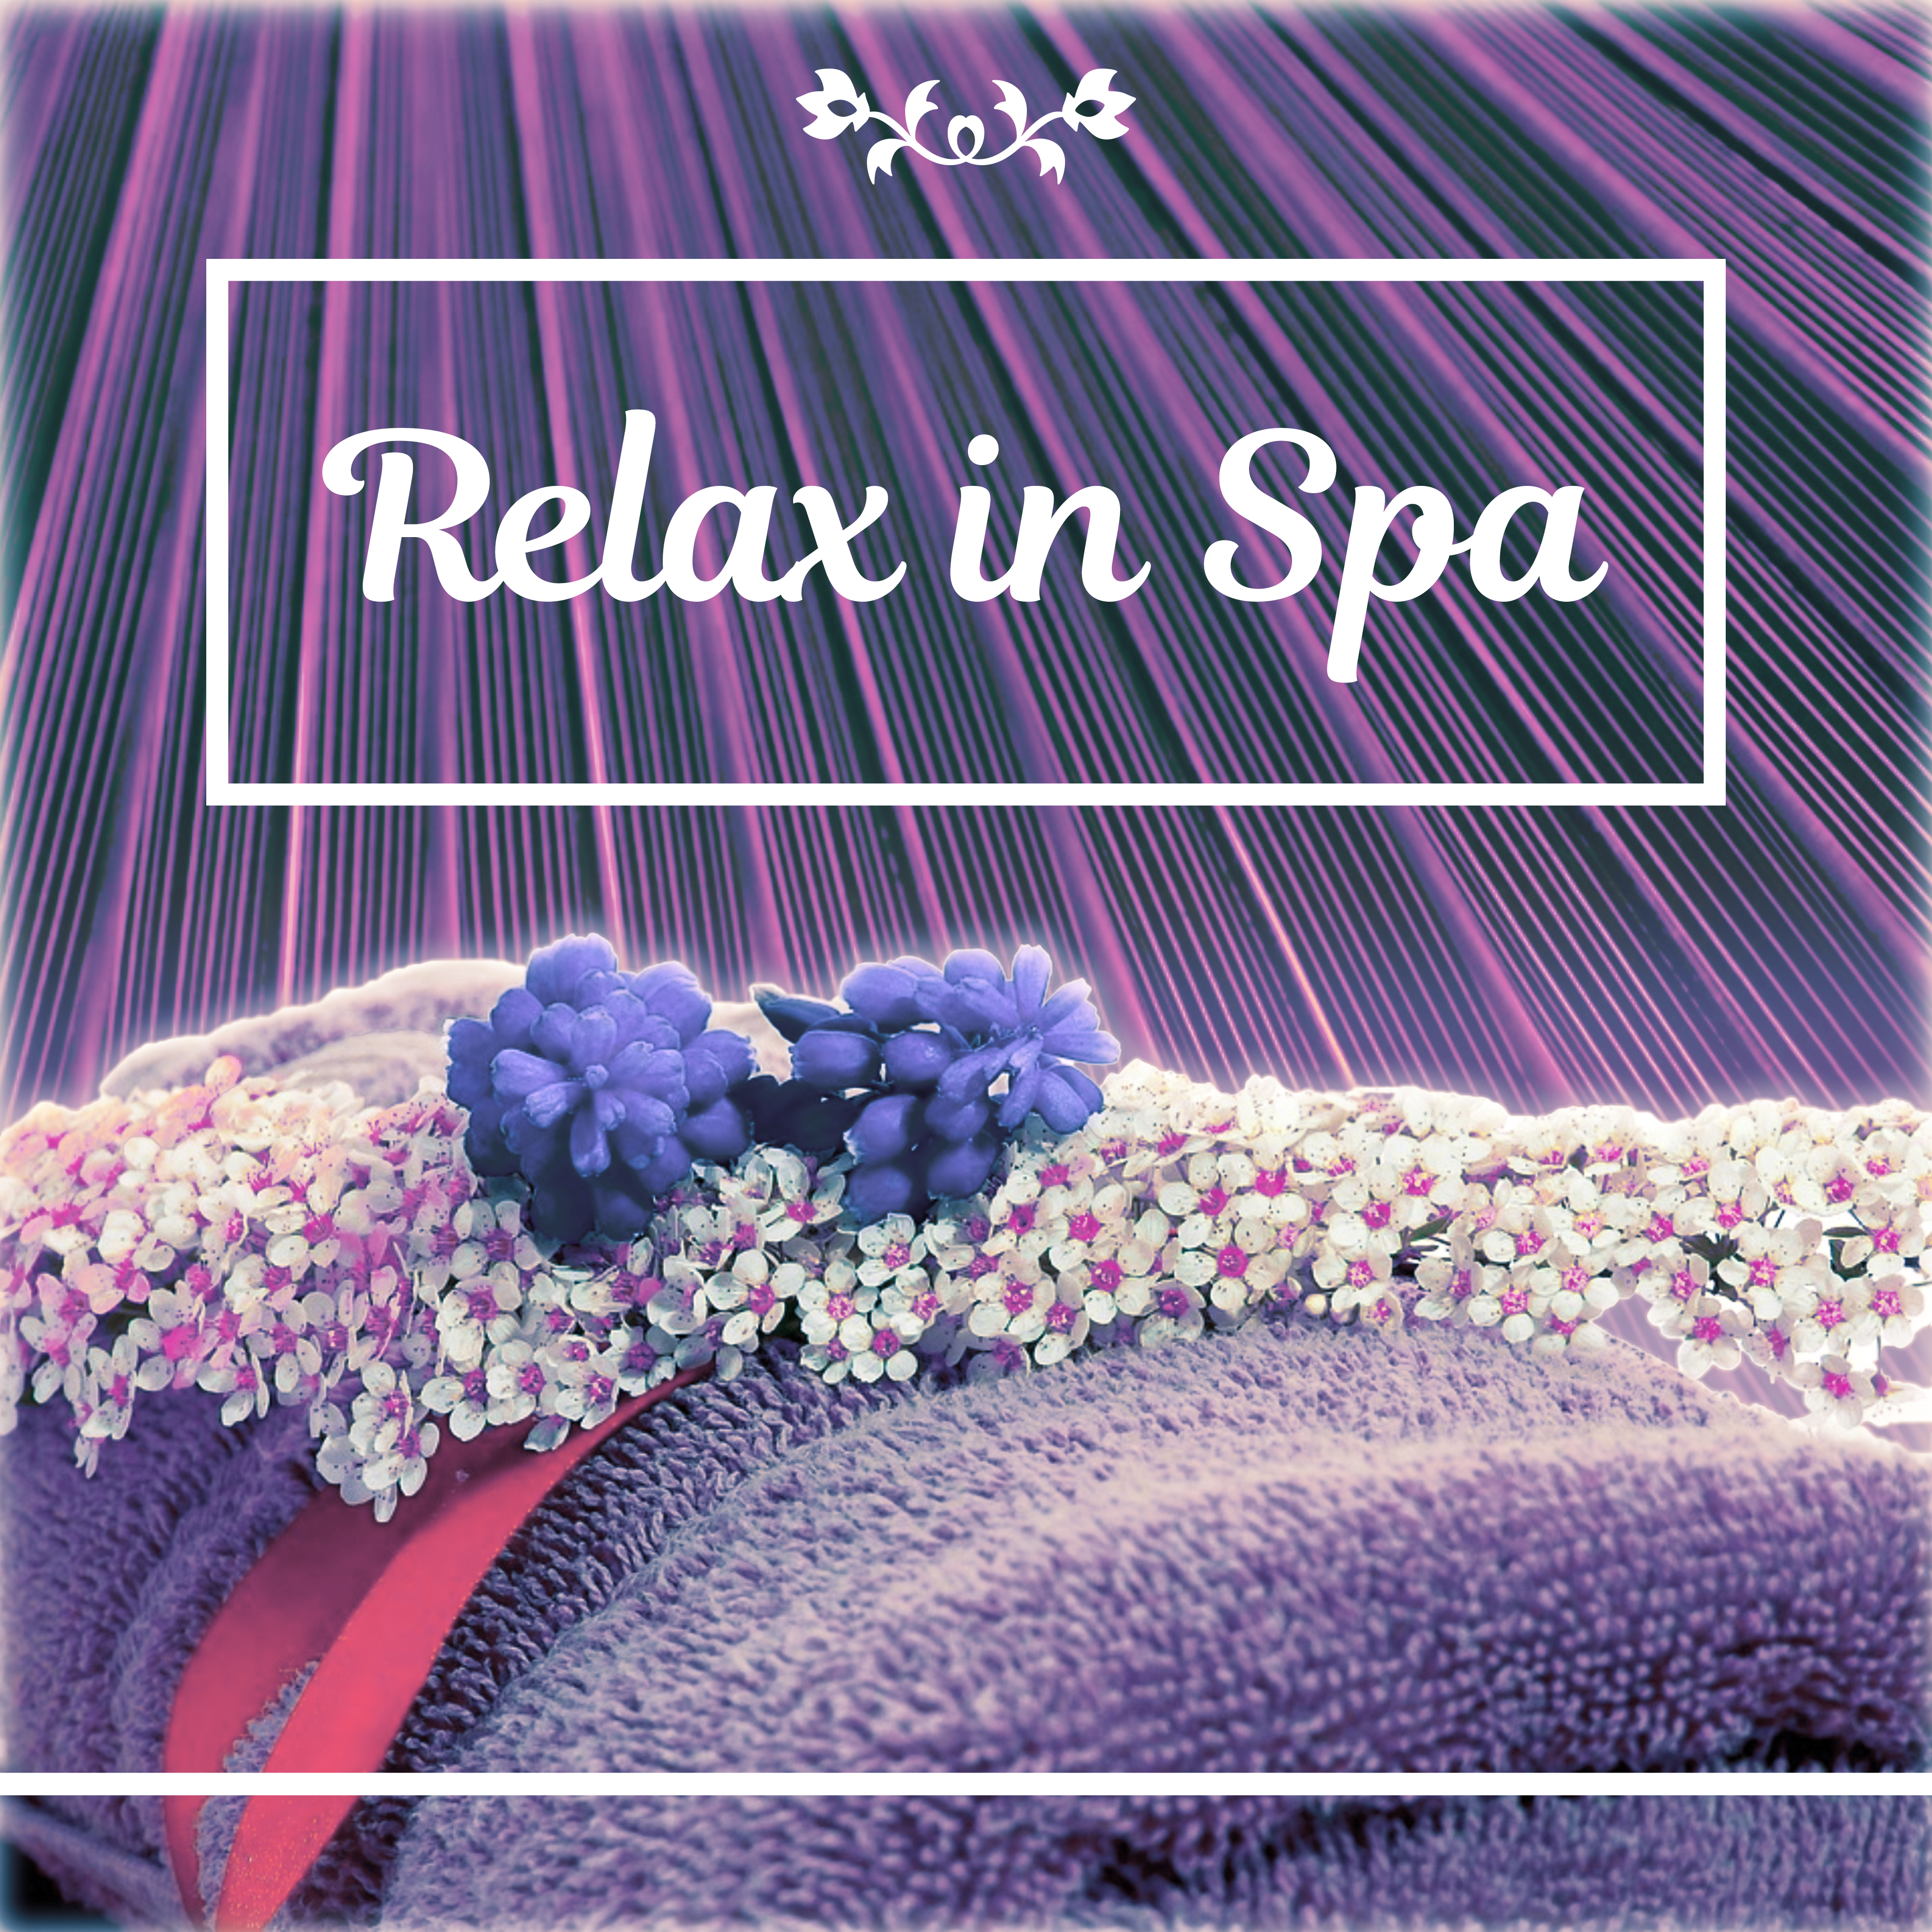 Relax in Spa  Peaceful Music for Spa, Wellness, Natural Sounds, Ocean Waves, Free Birds, Beauty Time for Soul and Body